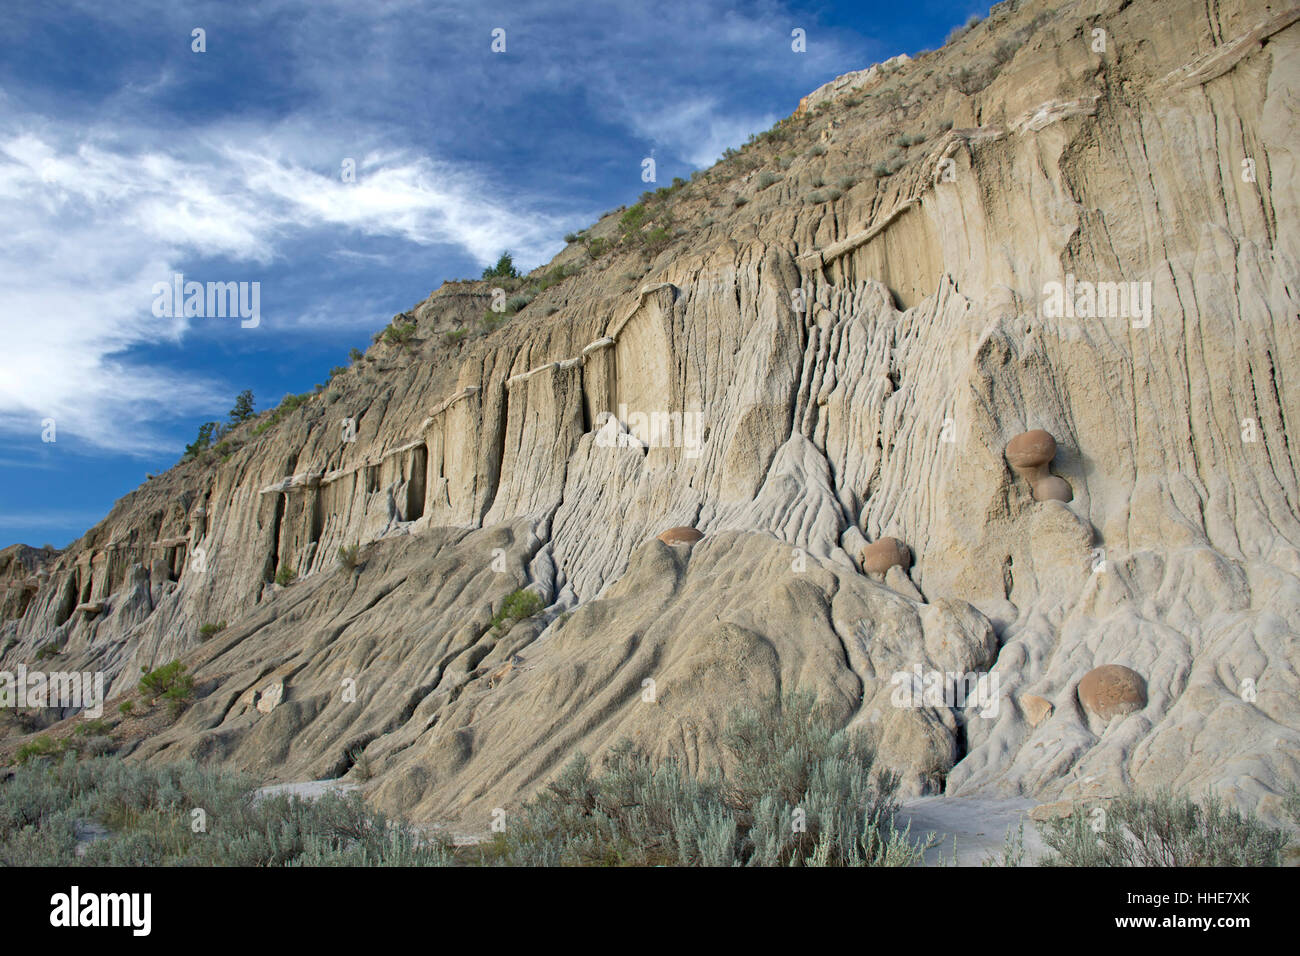 Interesting rock formations in Theodore Roosevelt National Park. Stock Photo